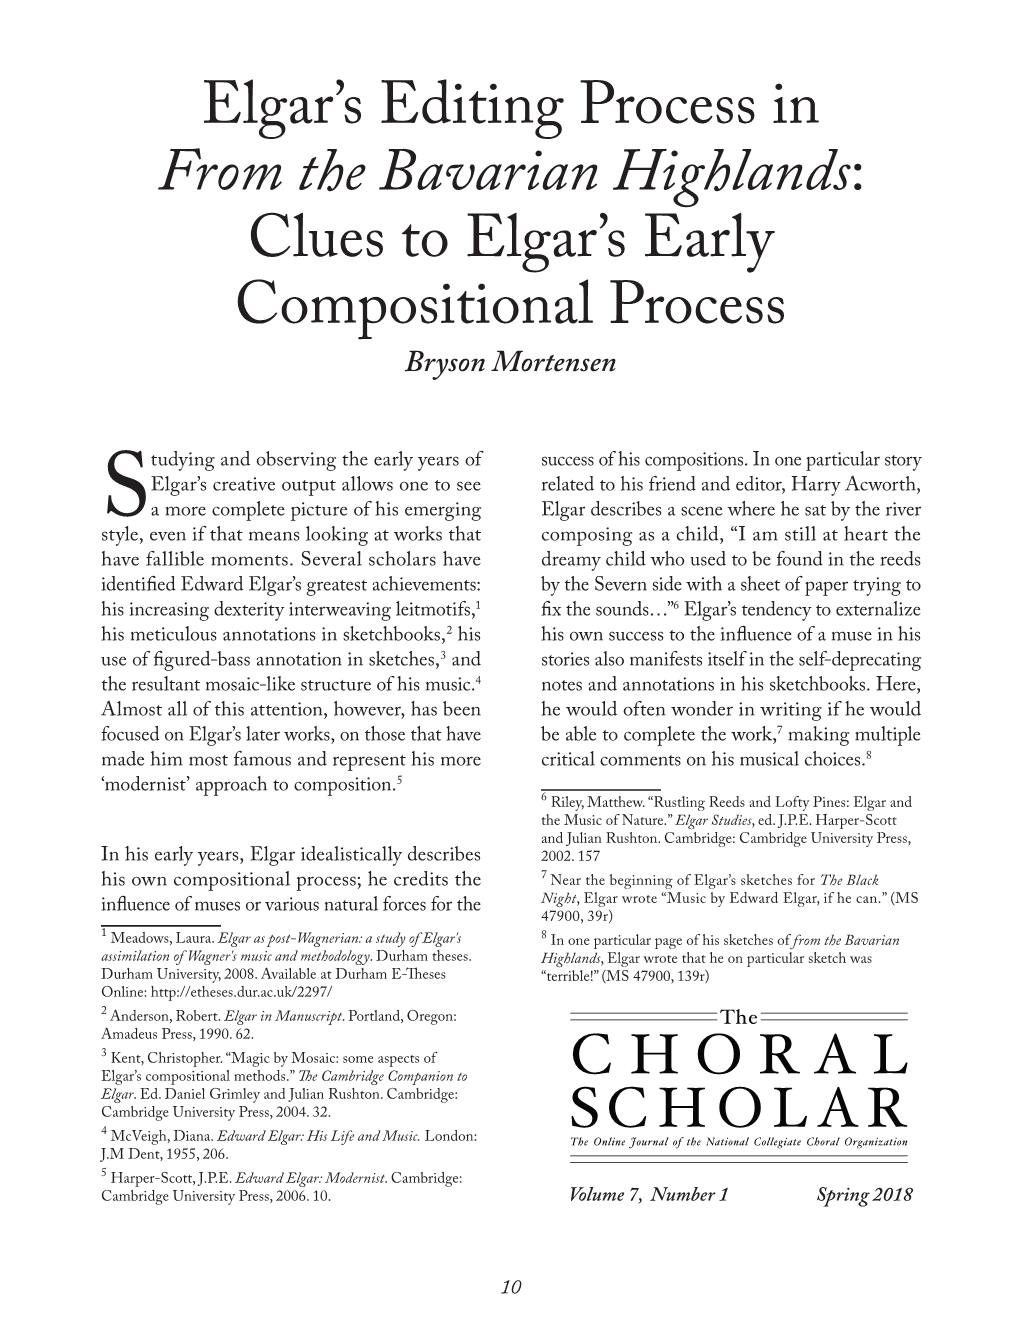 Elgar's Editing Process in from the Bavarian Highlands: Clues To